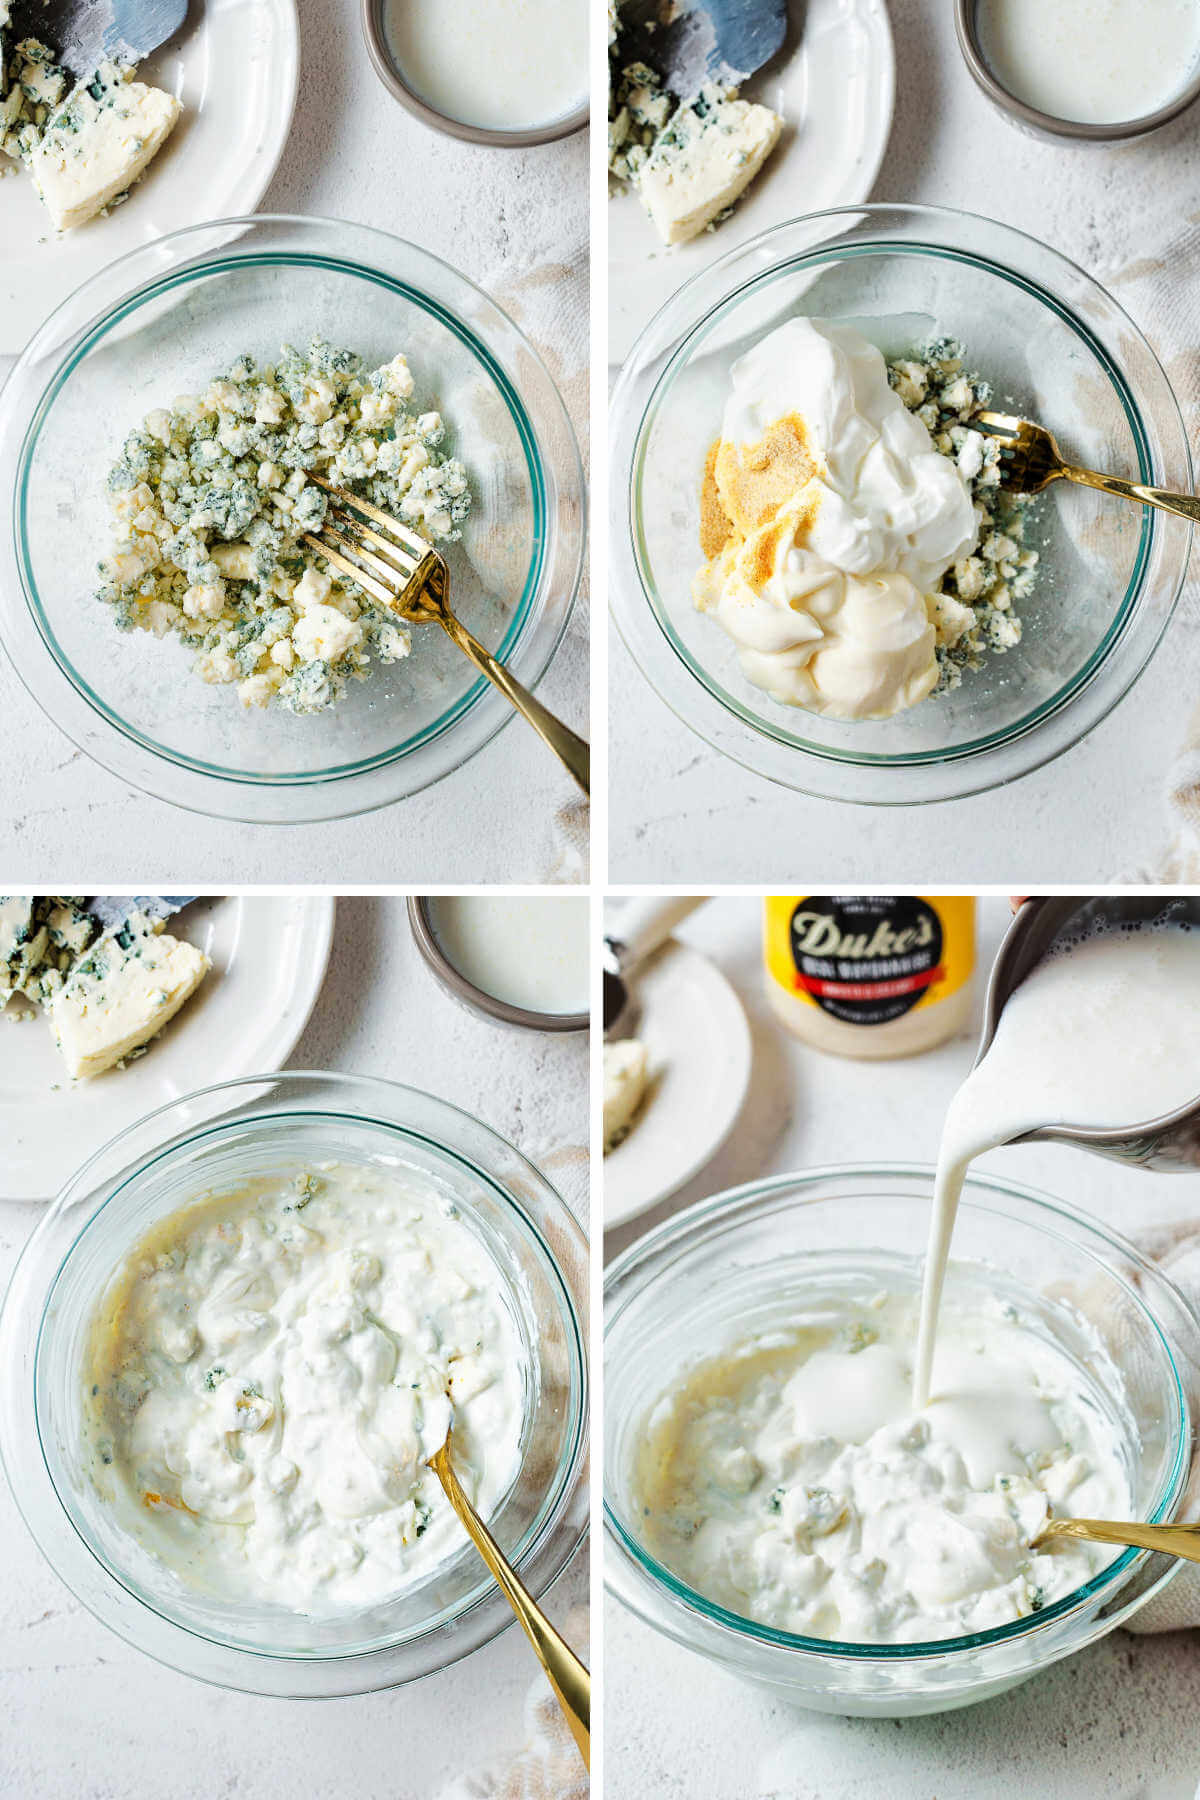 Combining ingredients for blue cheese dressing in a glass bowl.